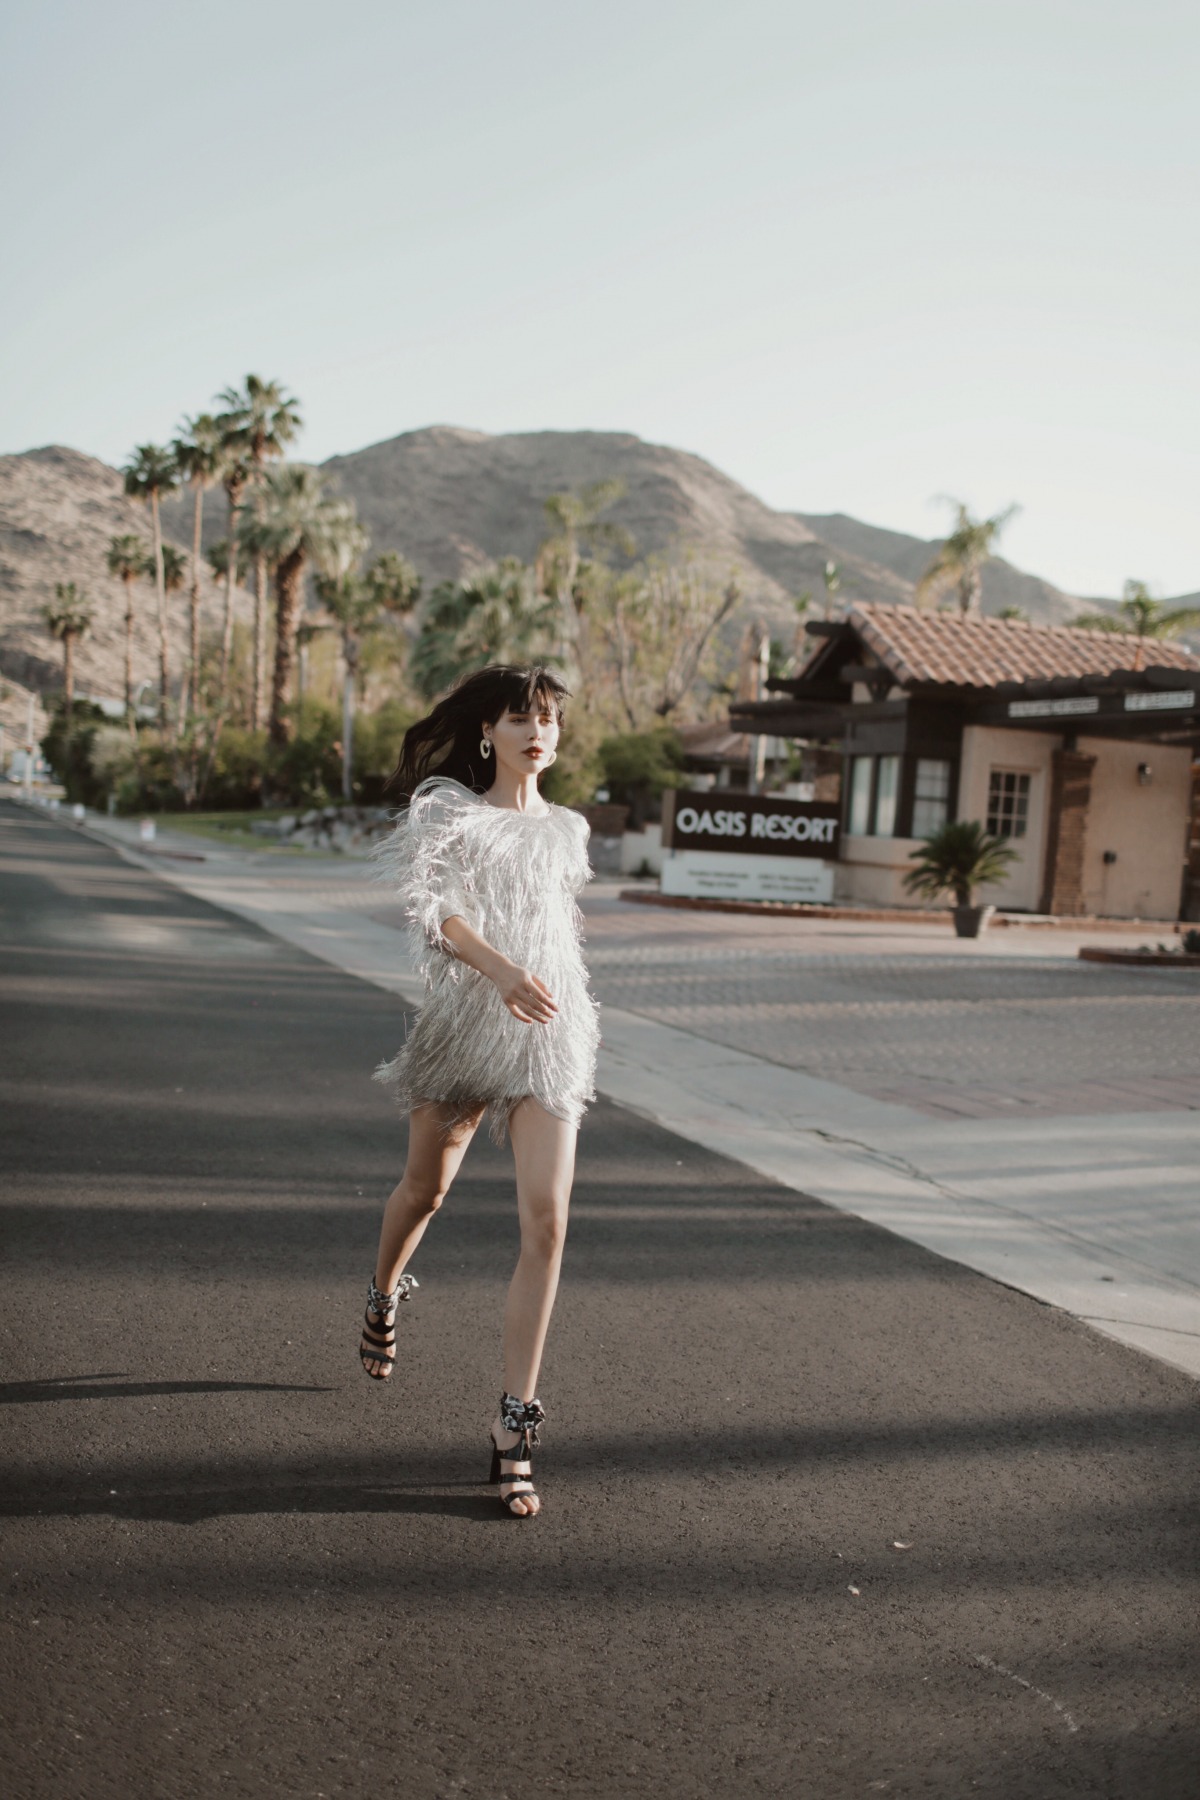 THE FRINGE DRESS IN PALM SPRINGS - NATALIE OFF DUTY